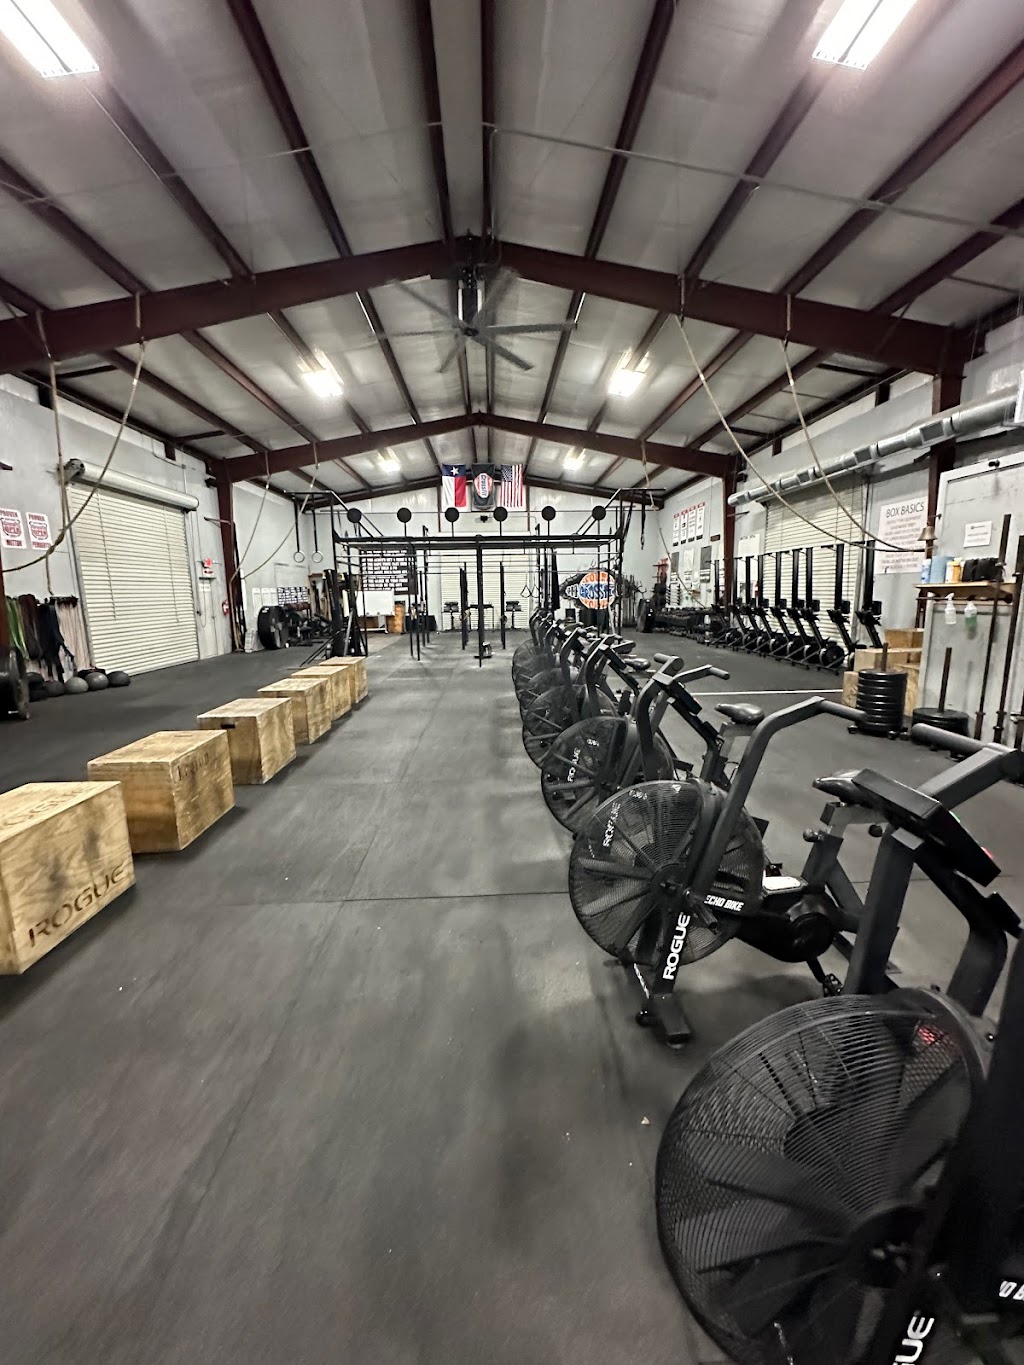 Crossfit South Forney | 12019 Lewis Cir, Forney, TX 75126, USA | Phone: (972) 989-4681